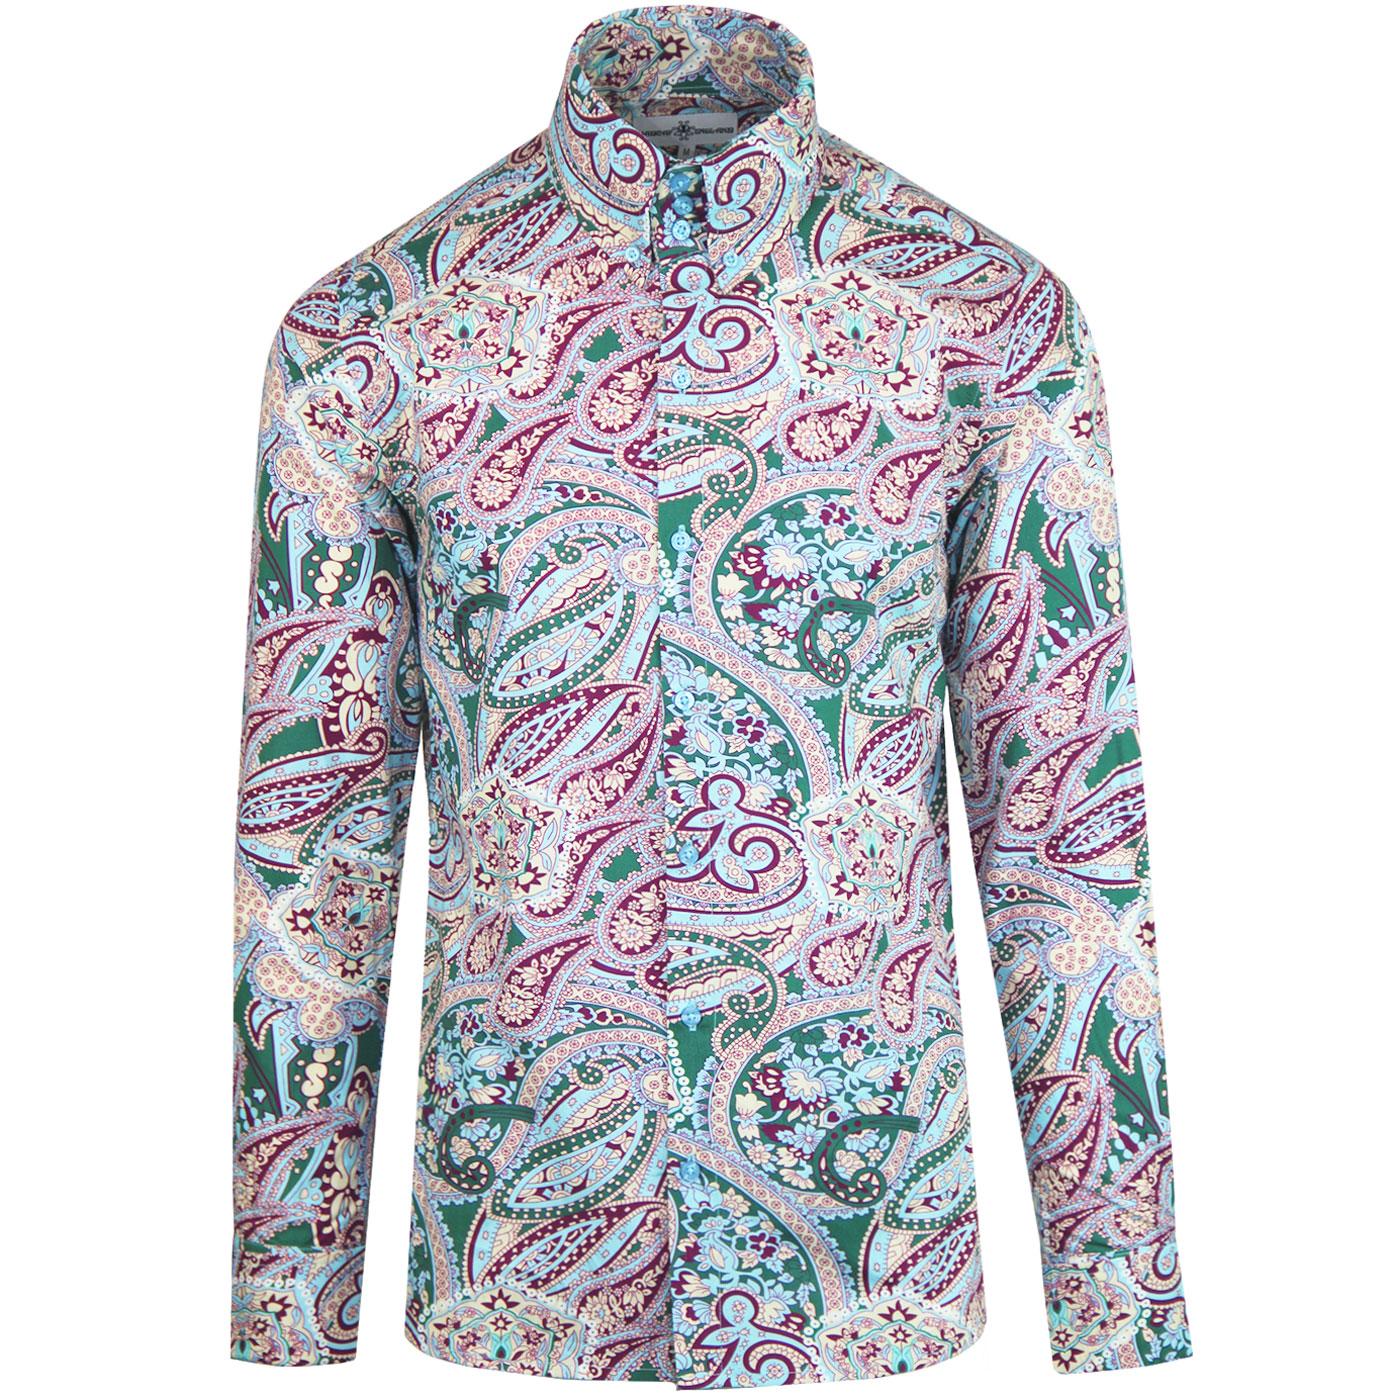 MENS PAISLEY BRIGHT PSYCHEDELIC PARTY CASUAL DRESS MOD 60s /& 70s DISCO SHIRT 496